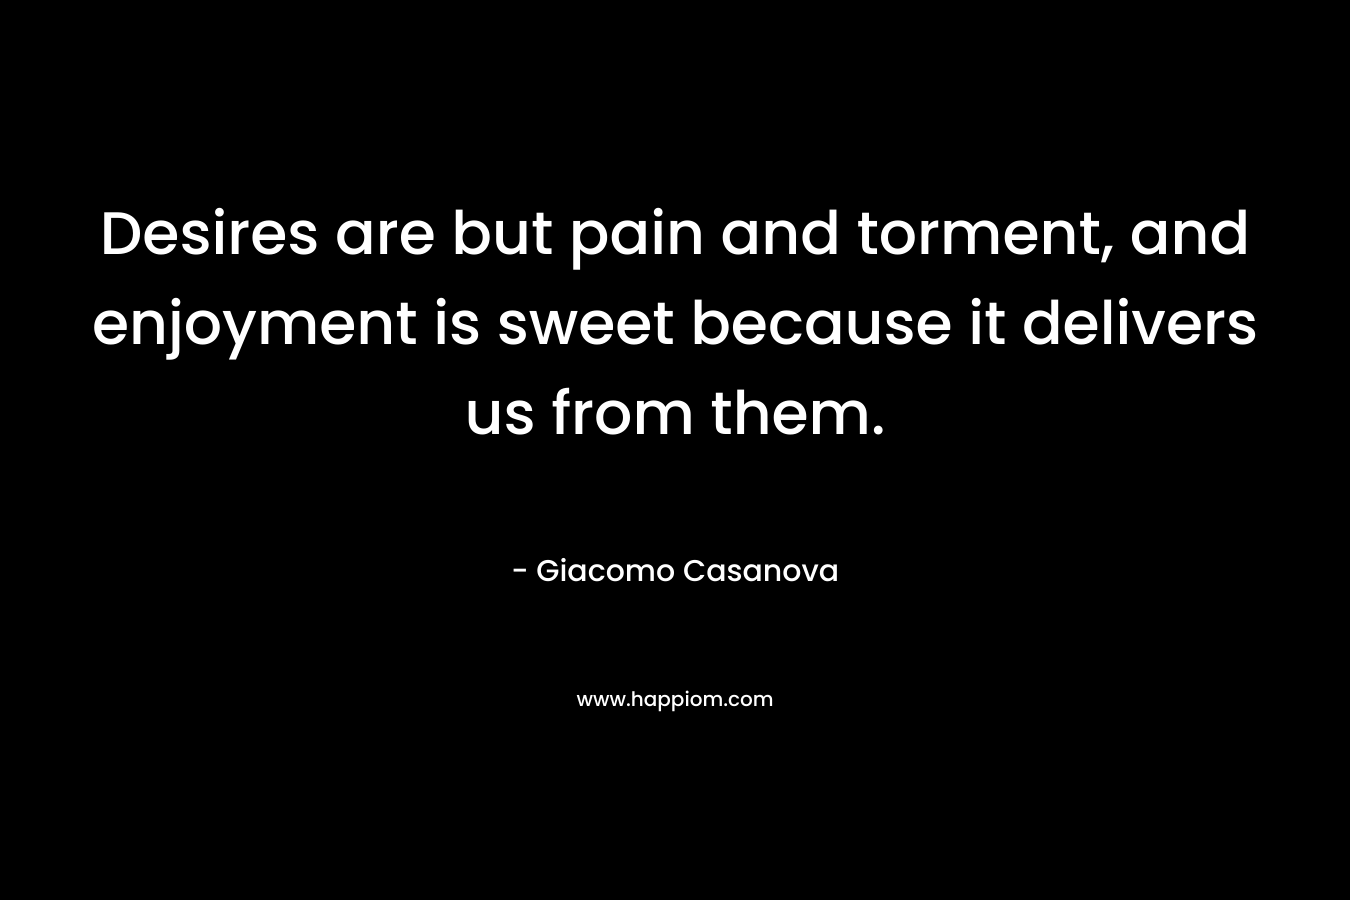 Desires are but pain and torment, and enjoyment is sweet because it delivers us from them. – Giacomo Casanova